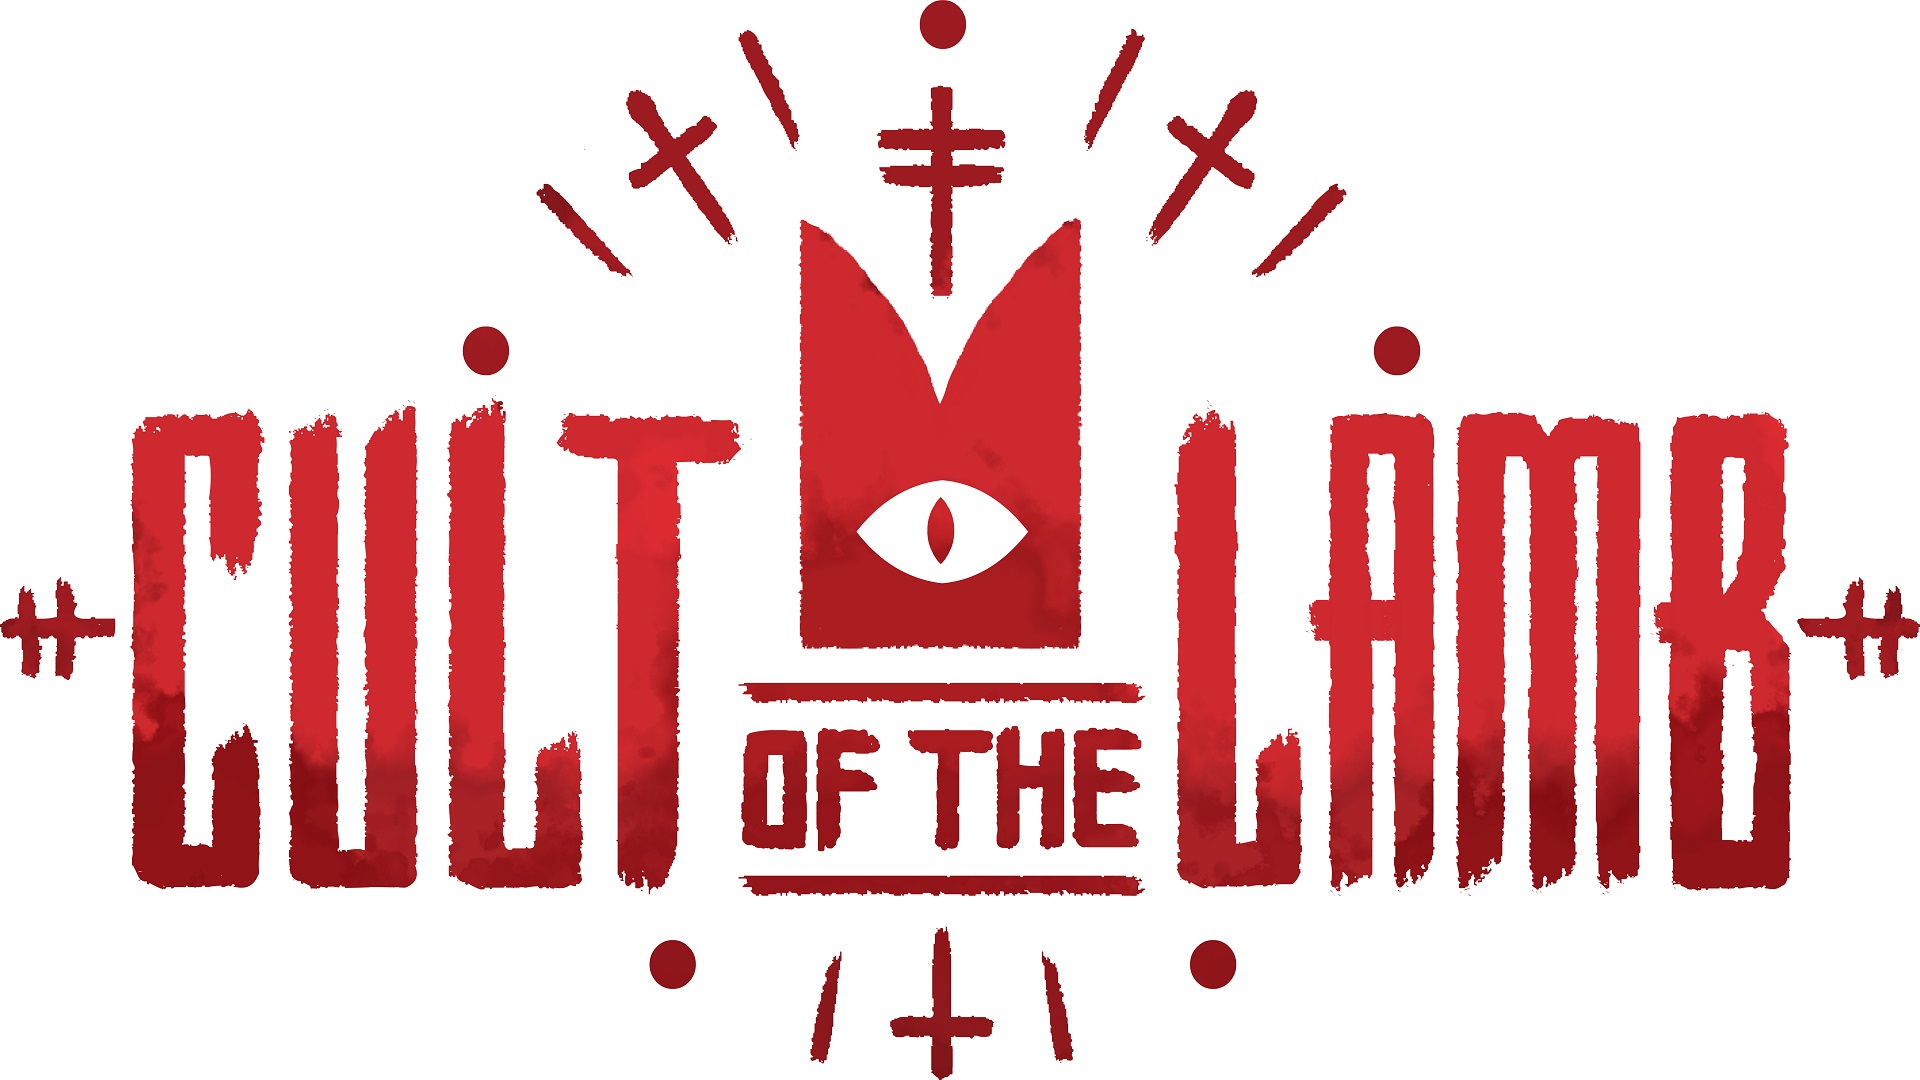 Cult of the Lamb Halloween 2022 event on now